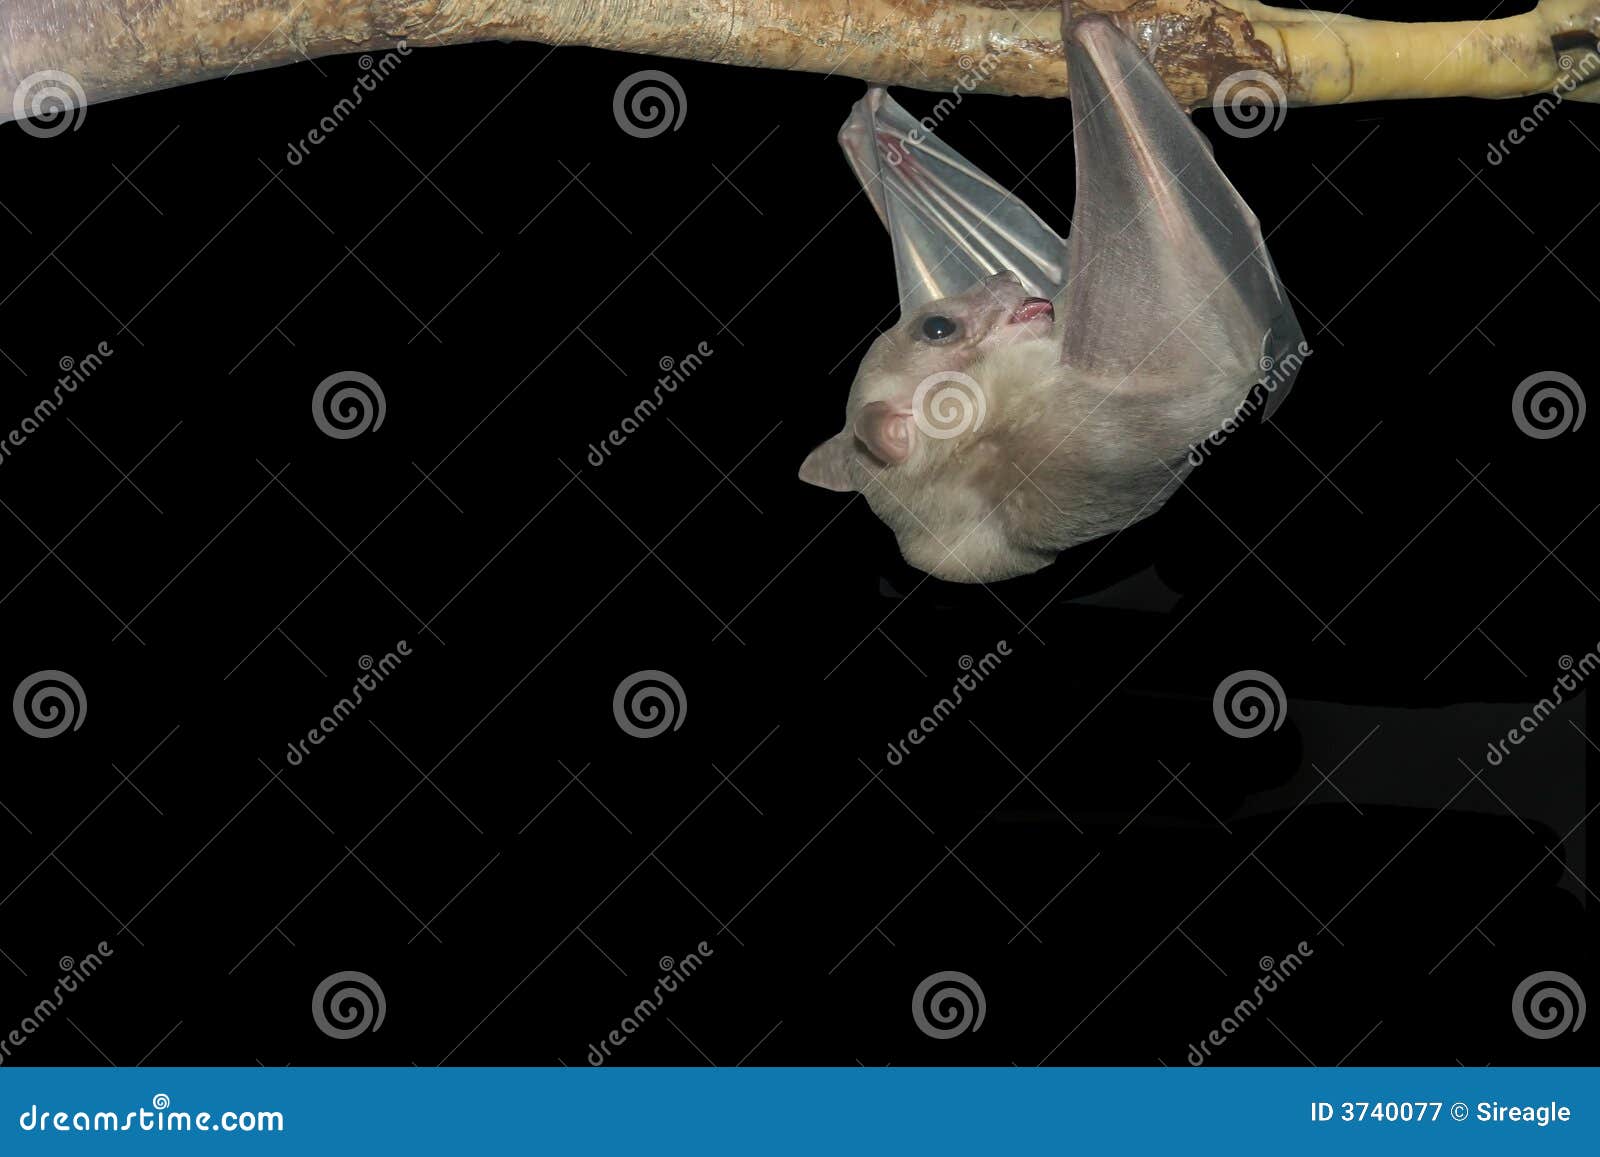 Bat Isolated On Black Picture. Image: 3740077